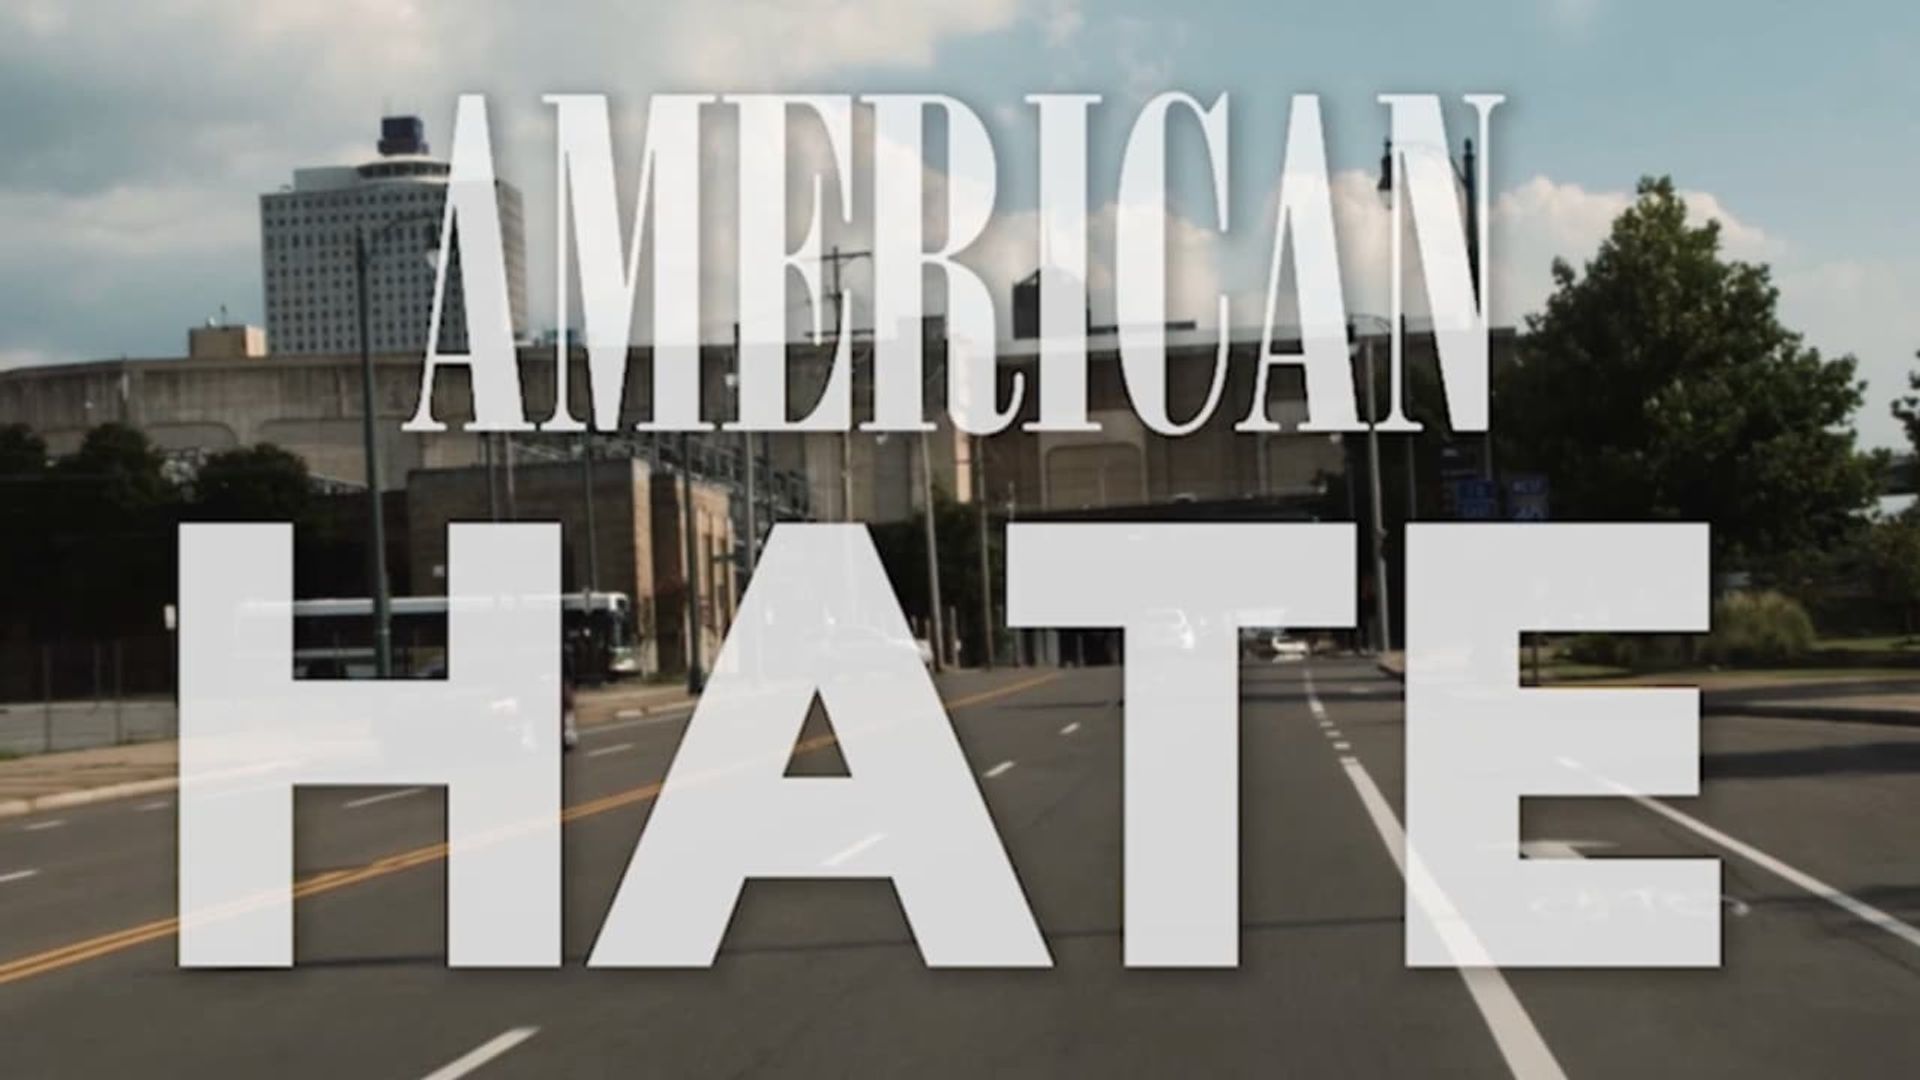 American Hate background